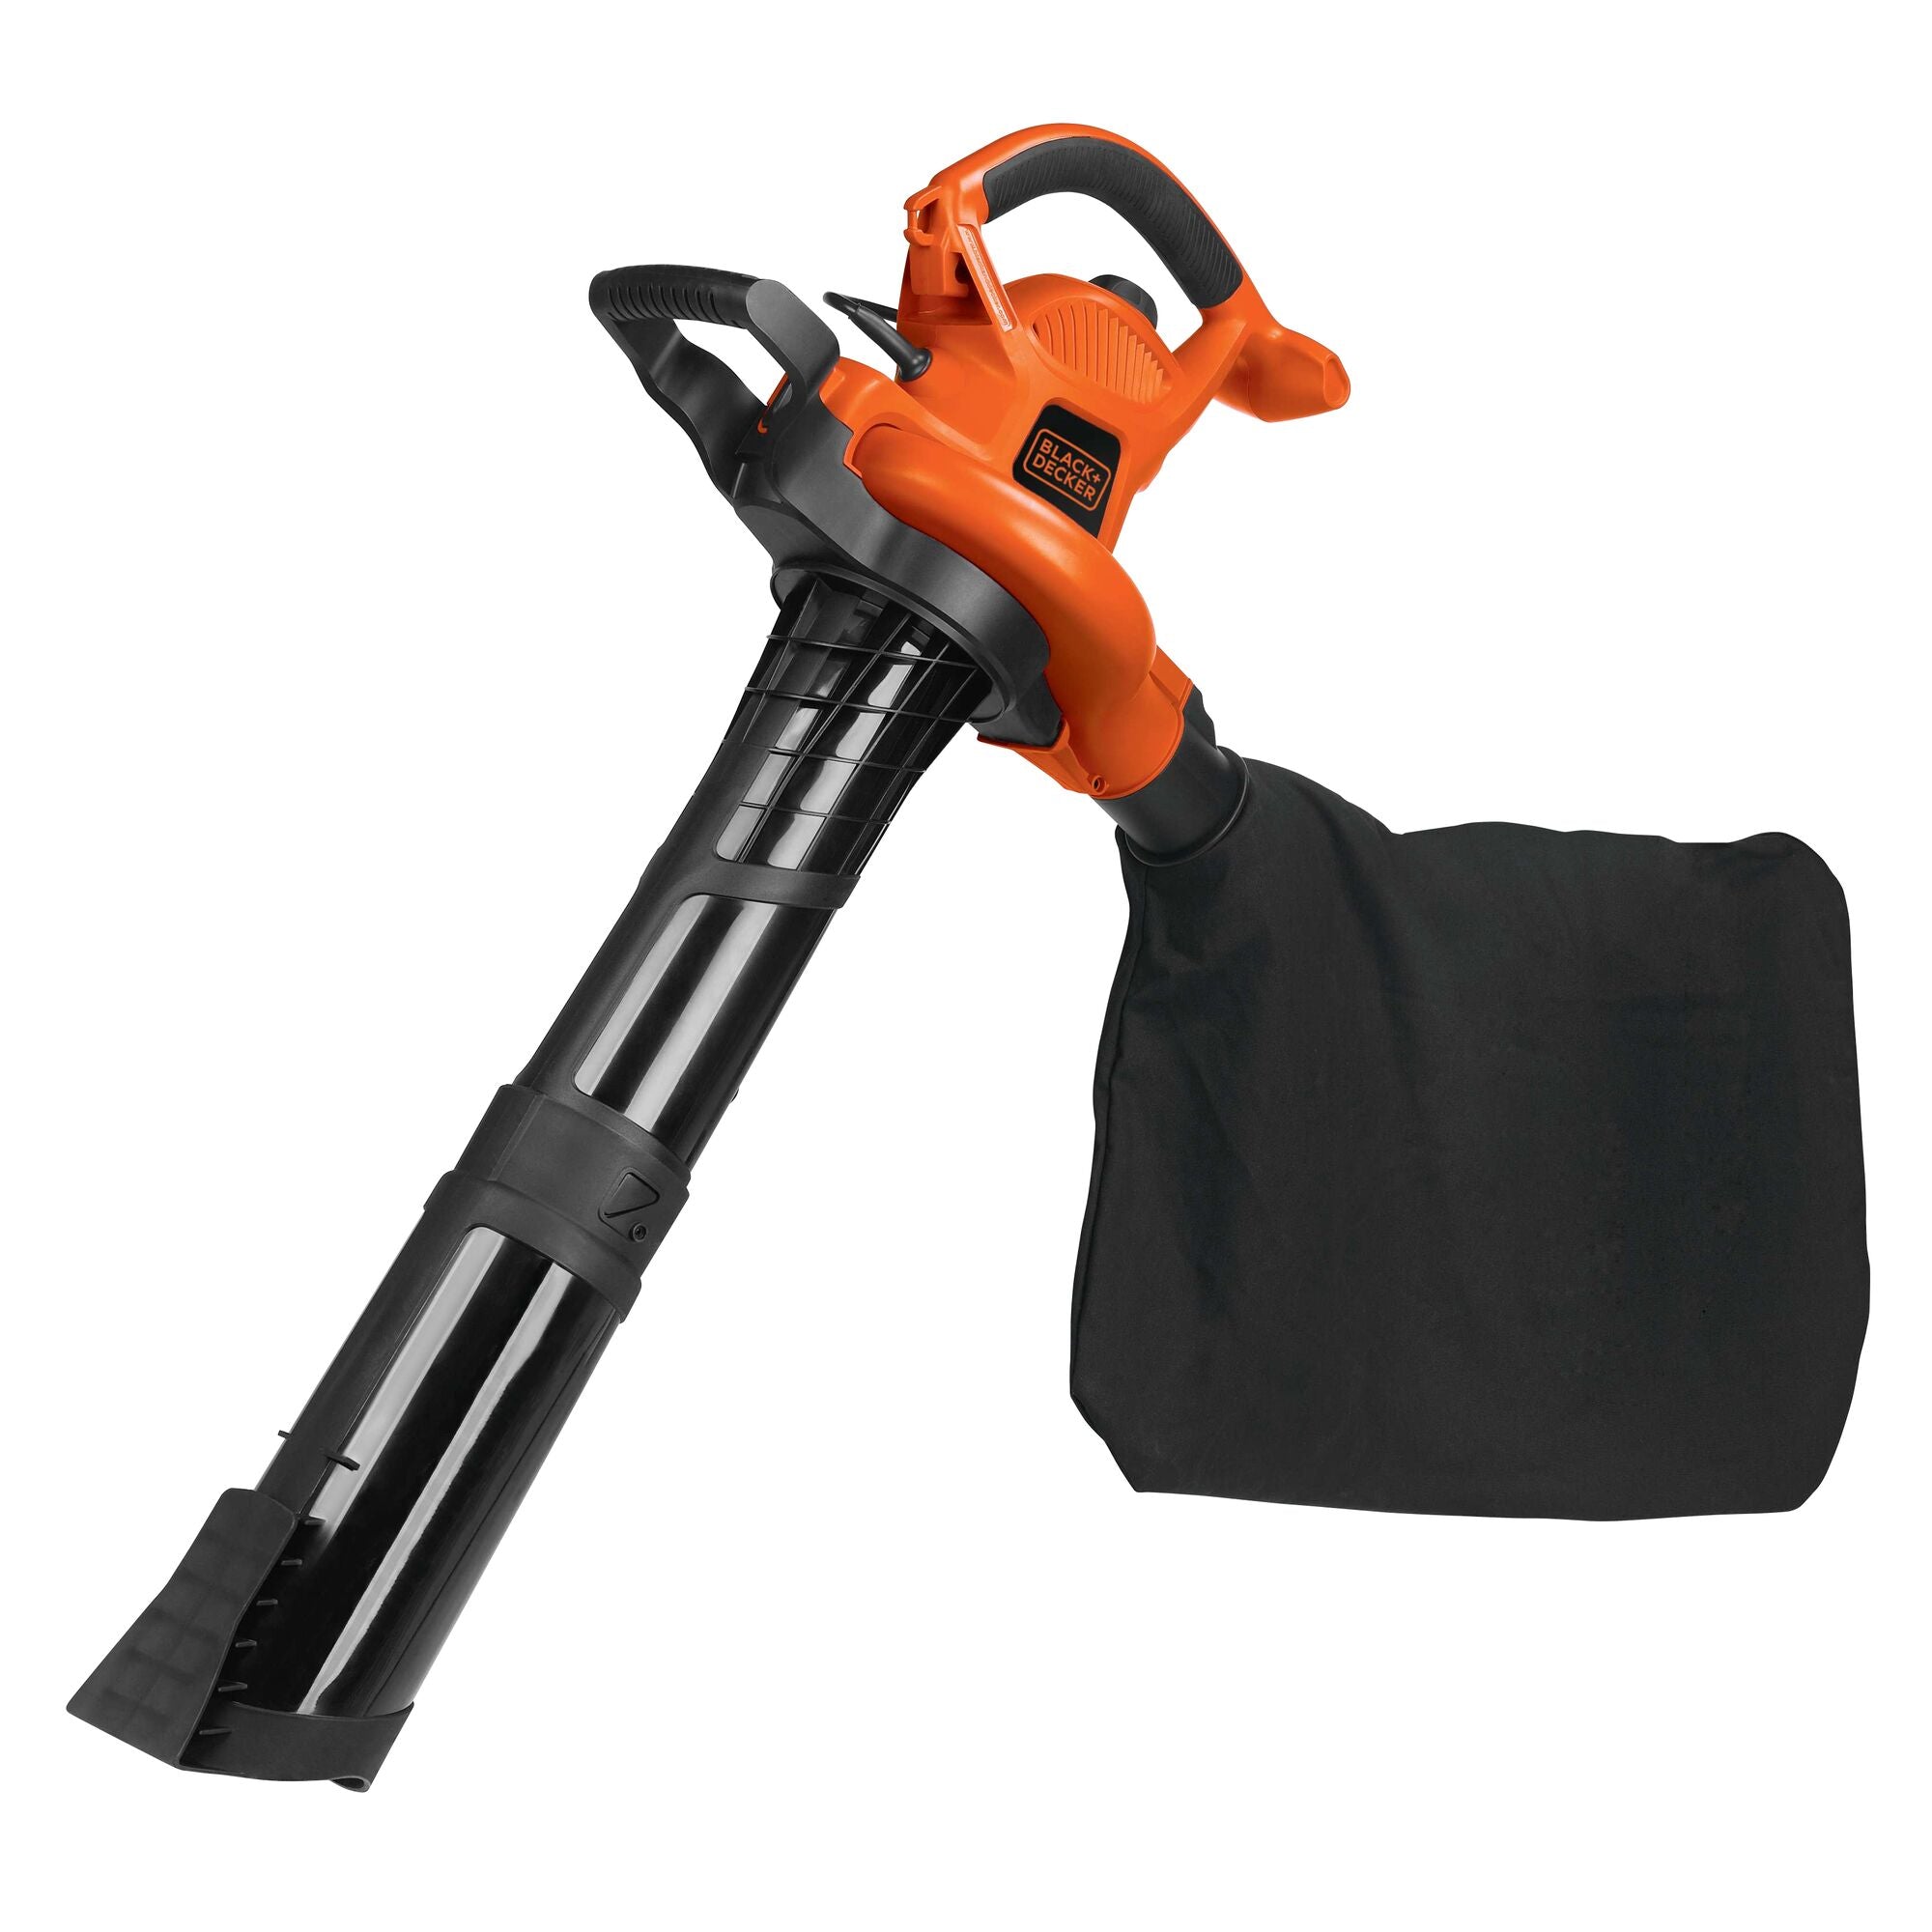  BLACK+DECKER 3-in-1 Leaf Blower, Leaf Vacuum and Mulcher, Up to  230 MPH, 12 Amp, Corded Electric (BV3600) : Patio, Lawn & Garden